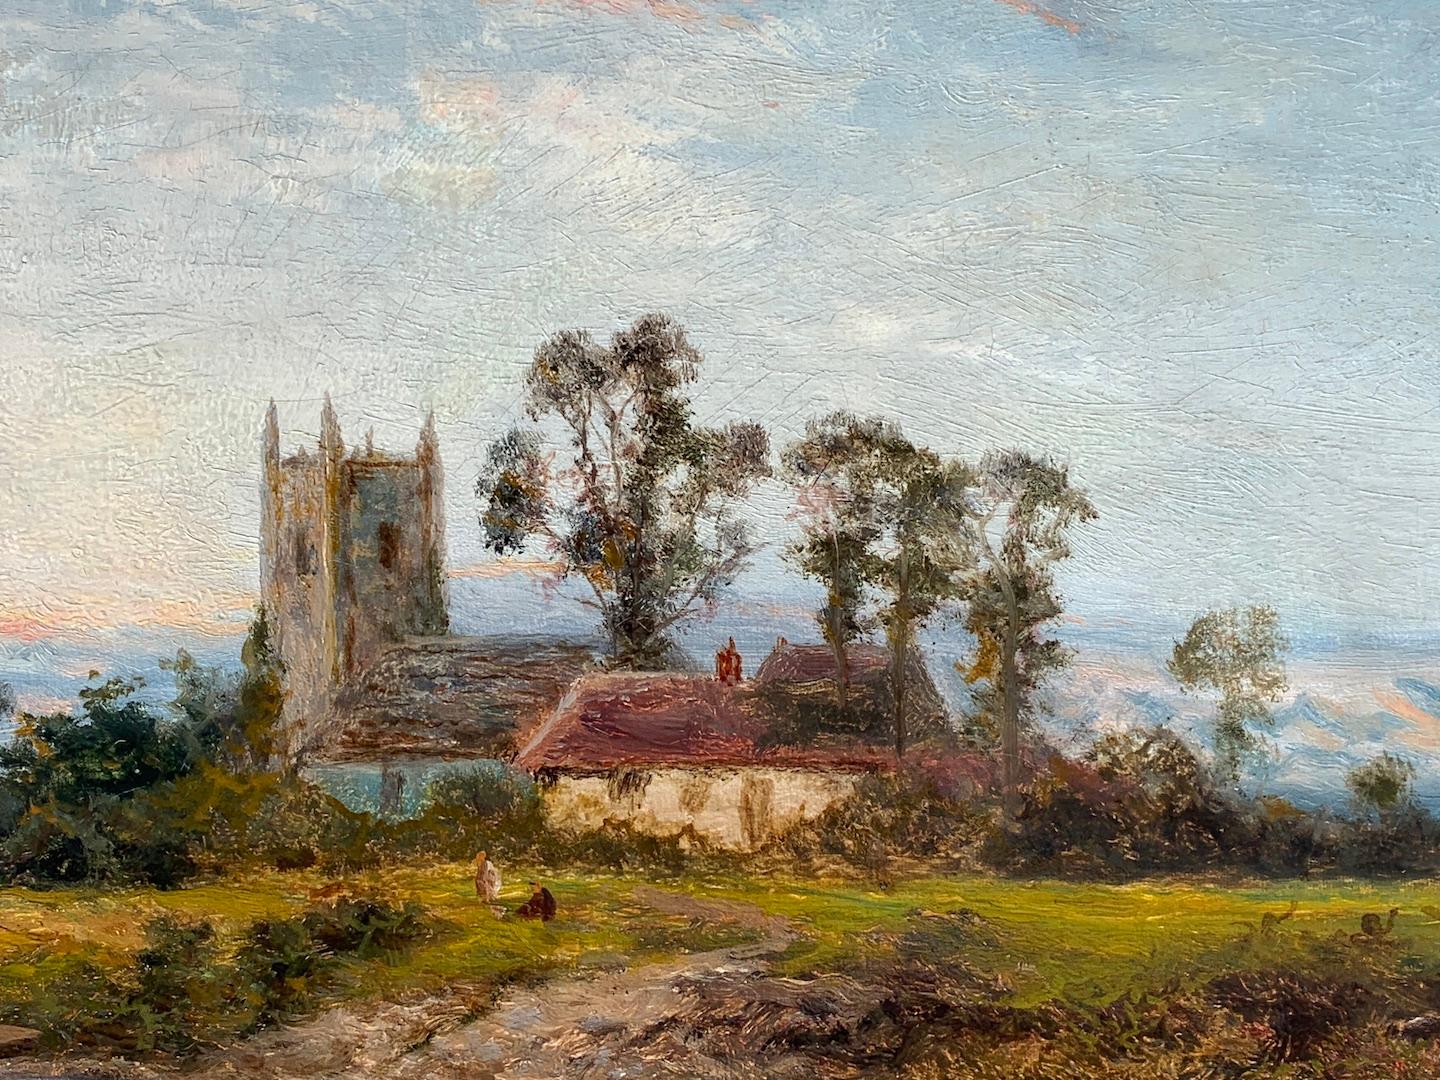 Well-painted English late 19th century RIver landscape, with river, Church Cottage at Sunrise

Daniel Sherrin 1868-1940 signed L. Richards This is a framed original oil painting on canvas by the late British painter Daniel Sherrin who painted under